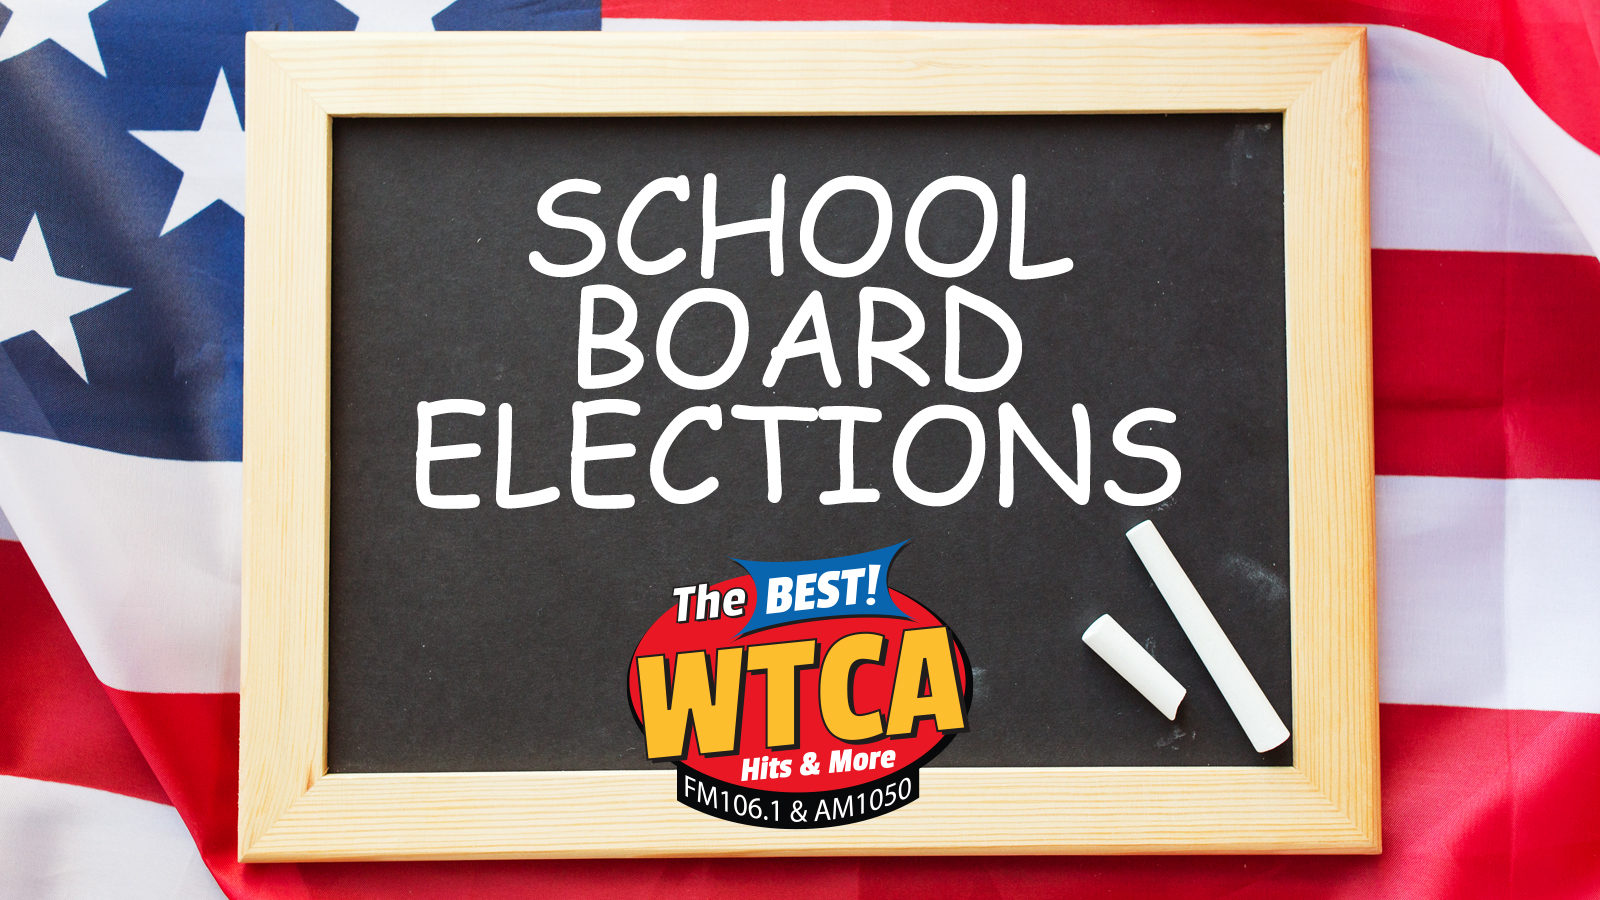 School Board Candidates Being Sought for 7 School Corporations WTCA